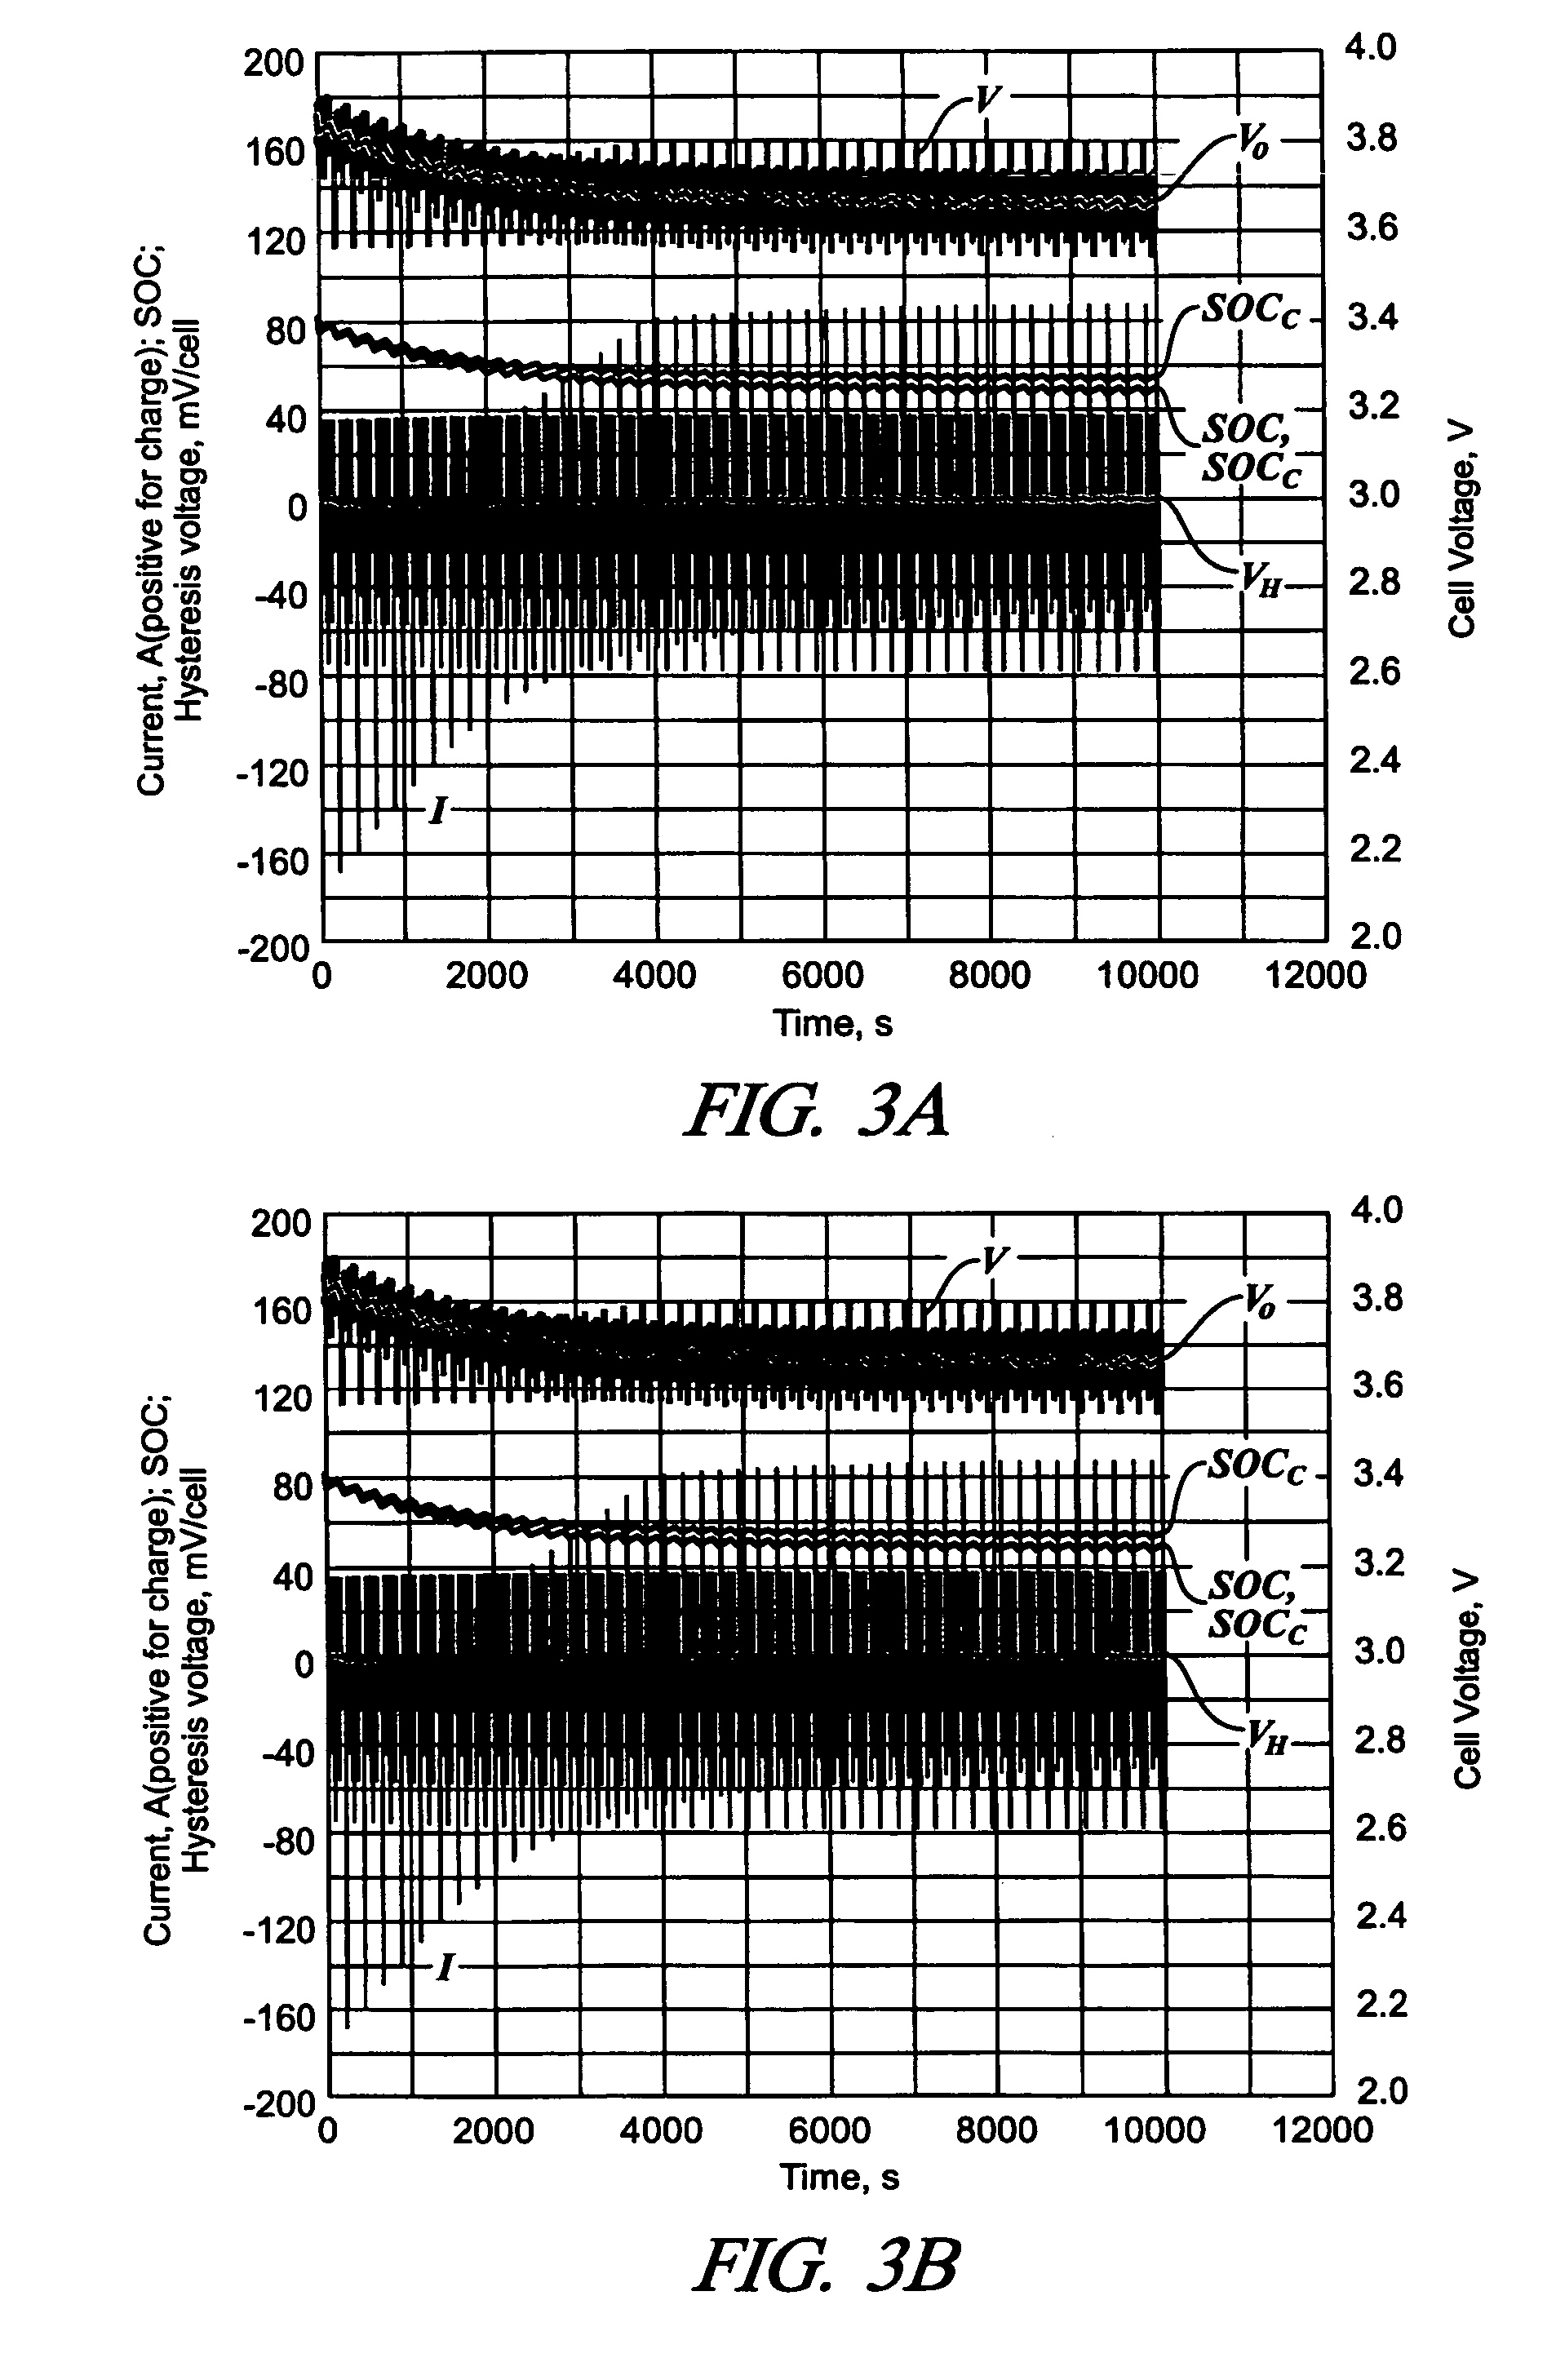 Method for controlling and monitoring using a state estimator having variable forgetting factors